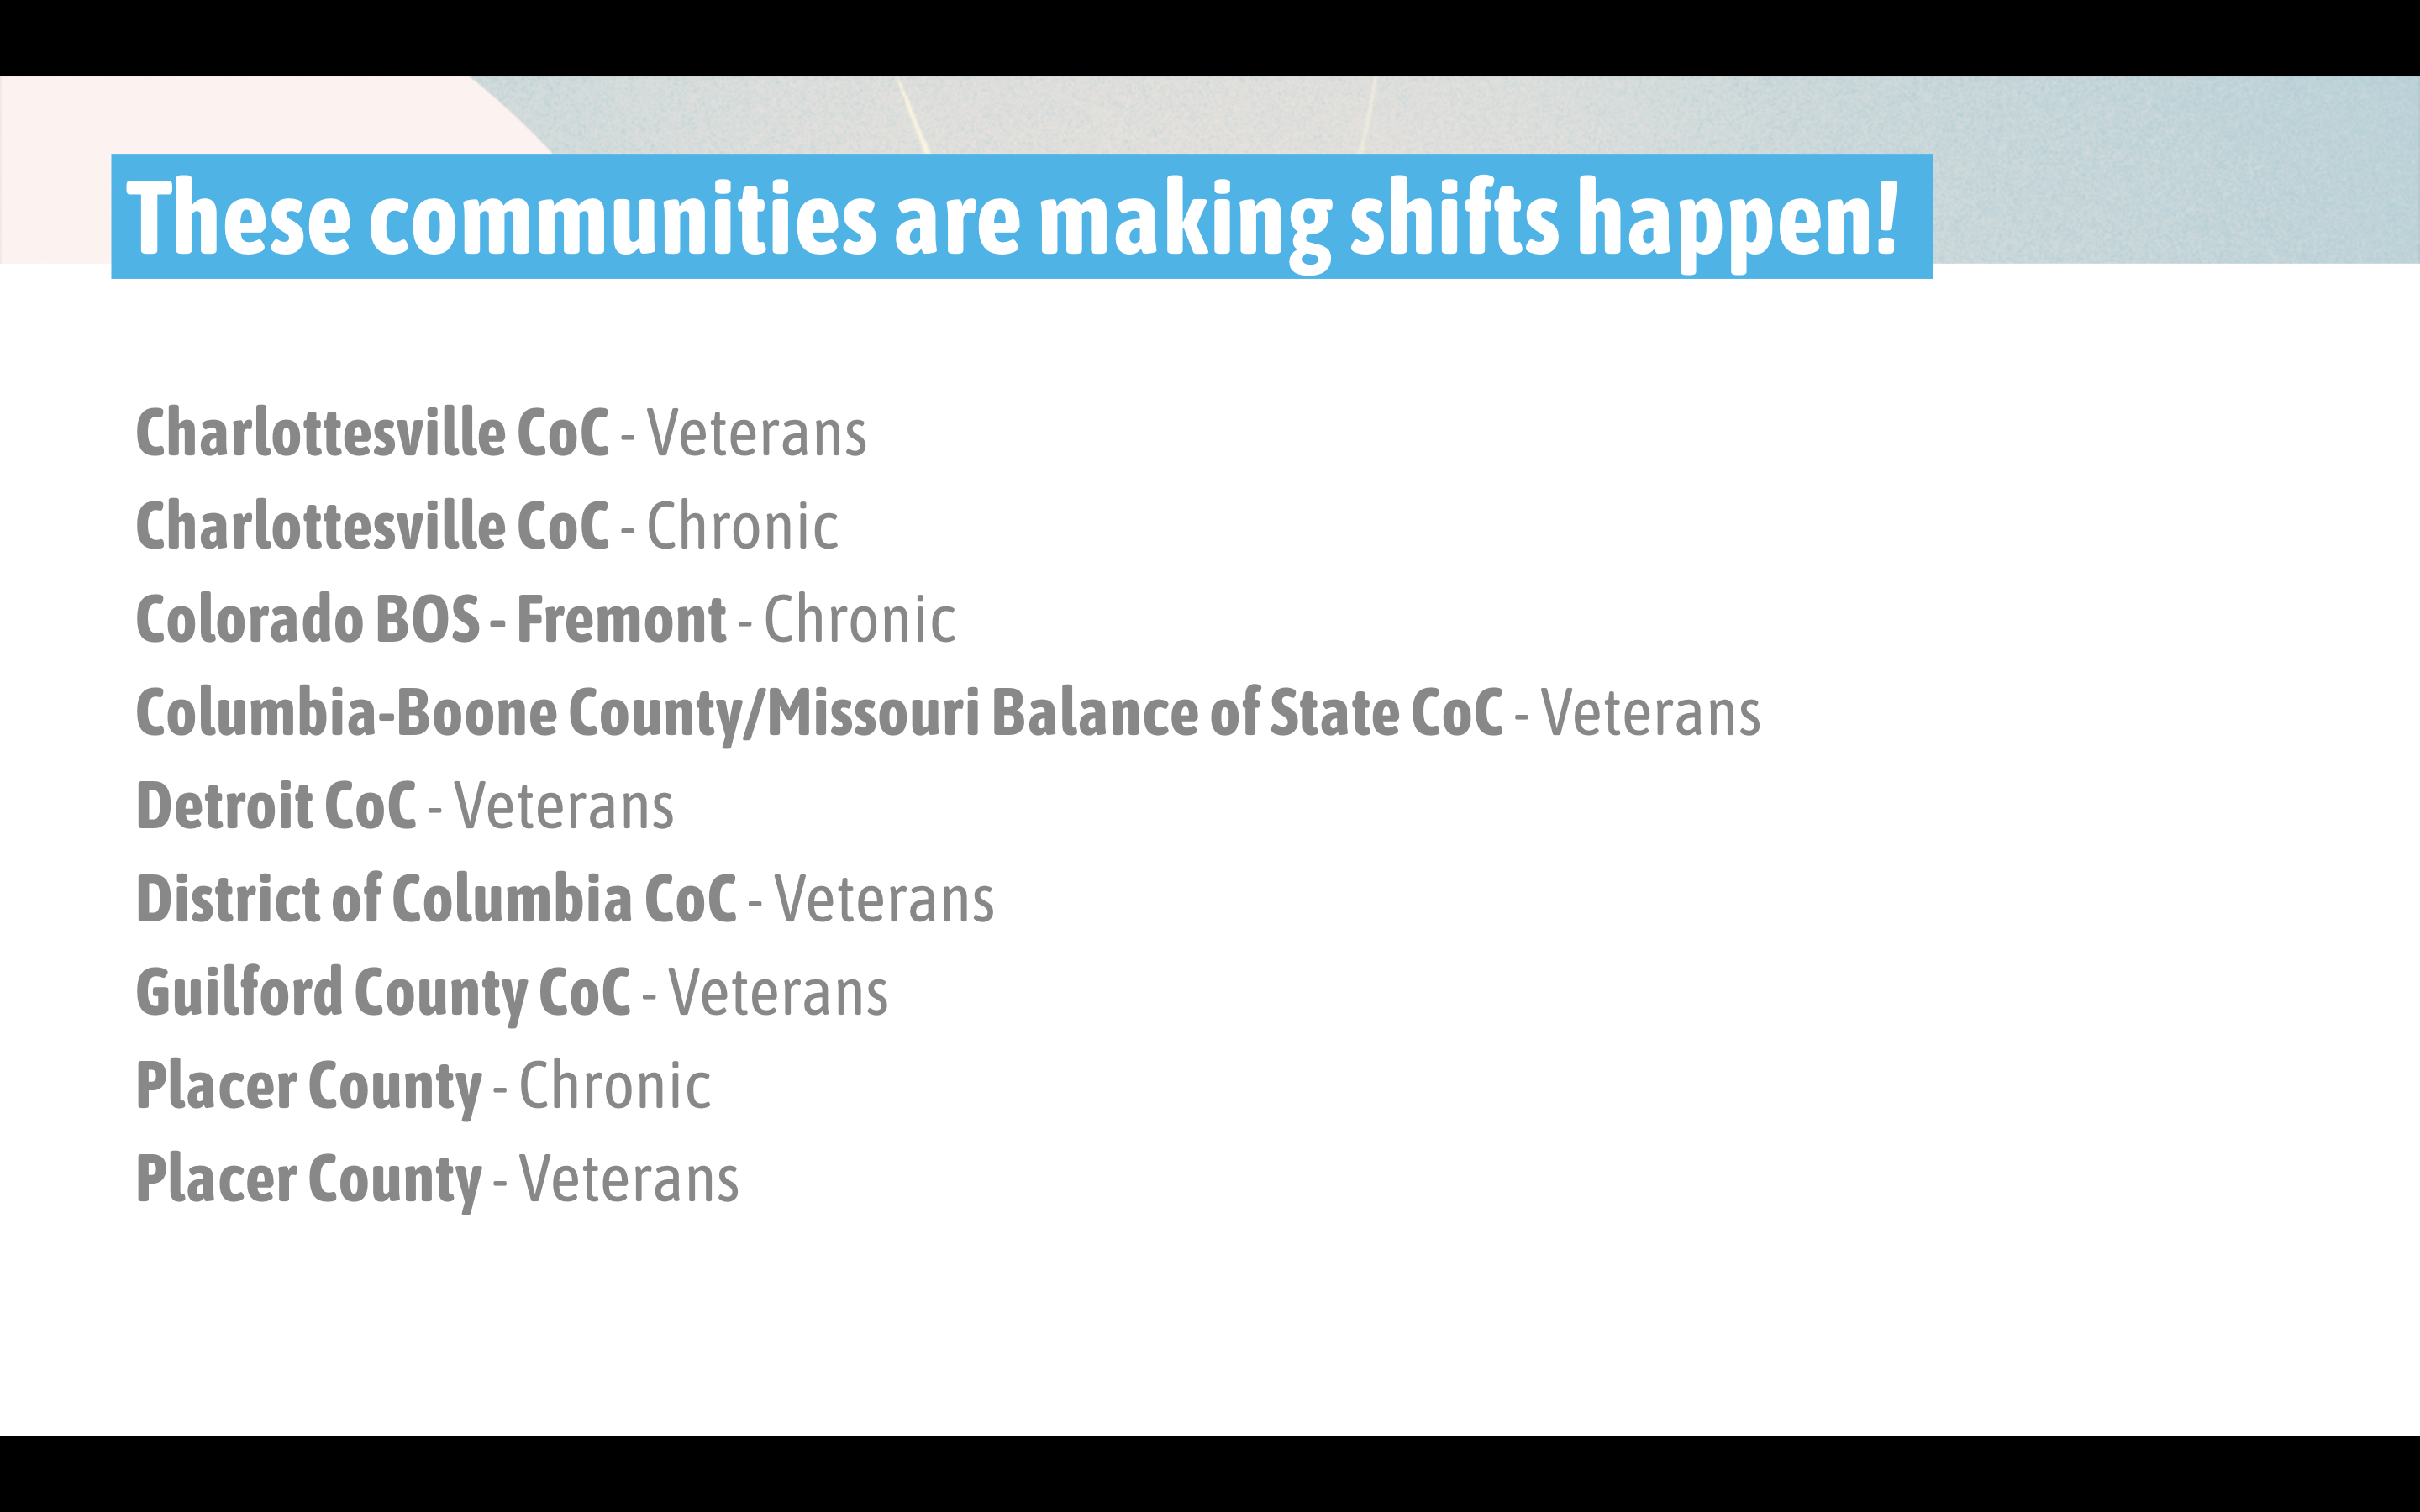  These communities are making shifts happen: Charlottesville CoC - Veterans Charlottesville CoC - Chronic Colorado BOS - Fremont - Chronic Columbia-Boone County/Missouri Balance of State CoC - Veterans Detroit CoC - Veterans District of Columbia CoC - Veterans Guilford County CoC - Veterans Placer County - Chronic Placer County - Veterans